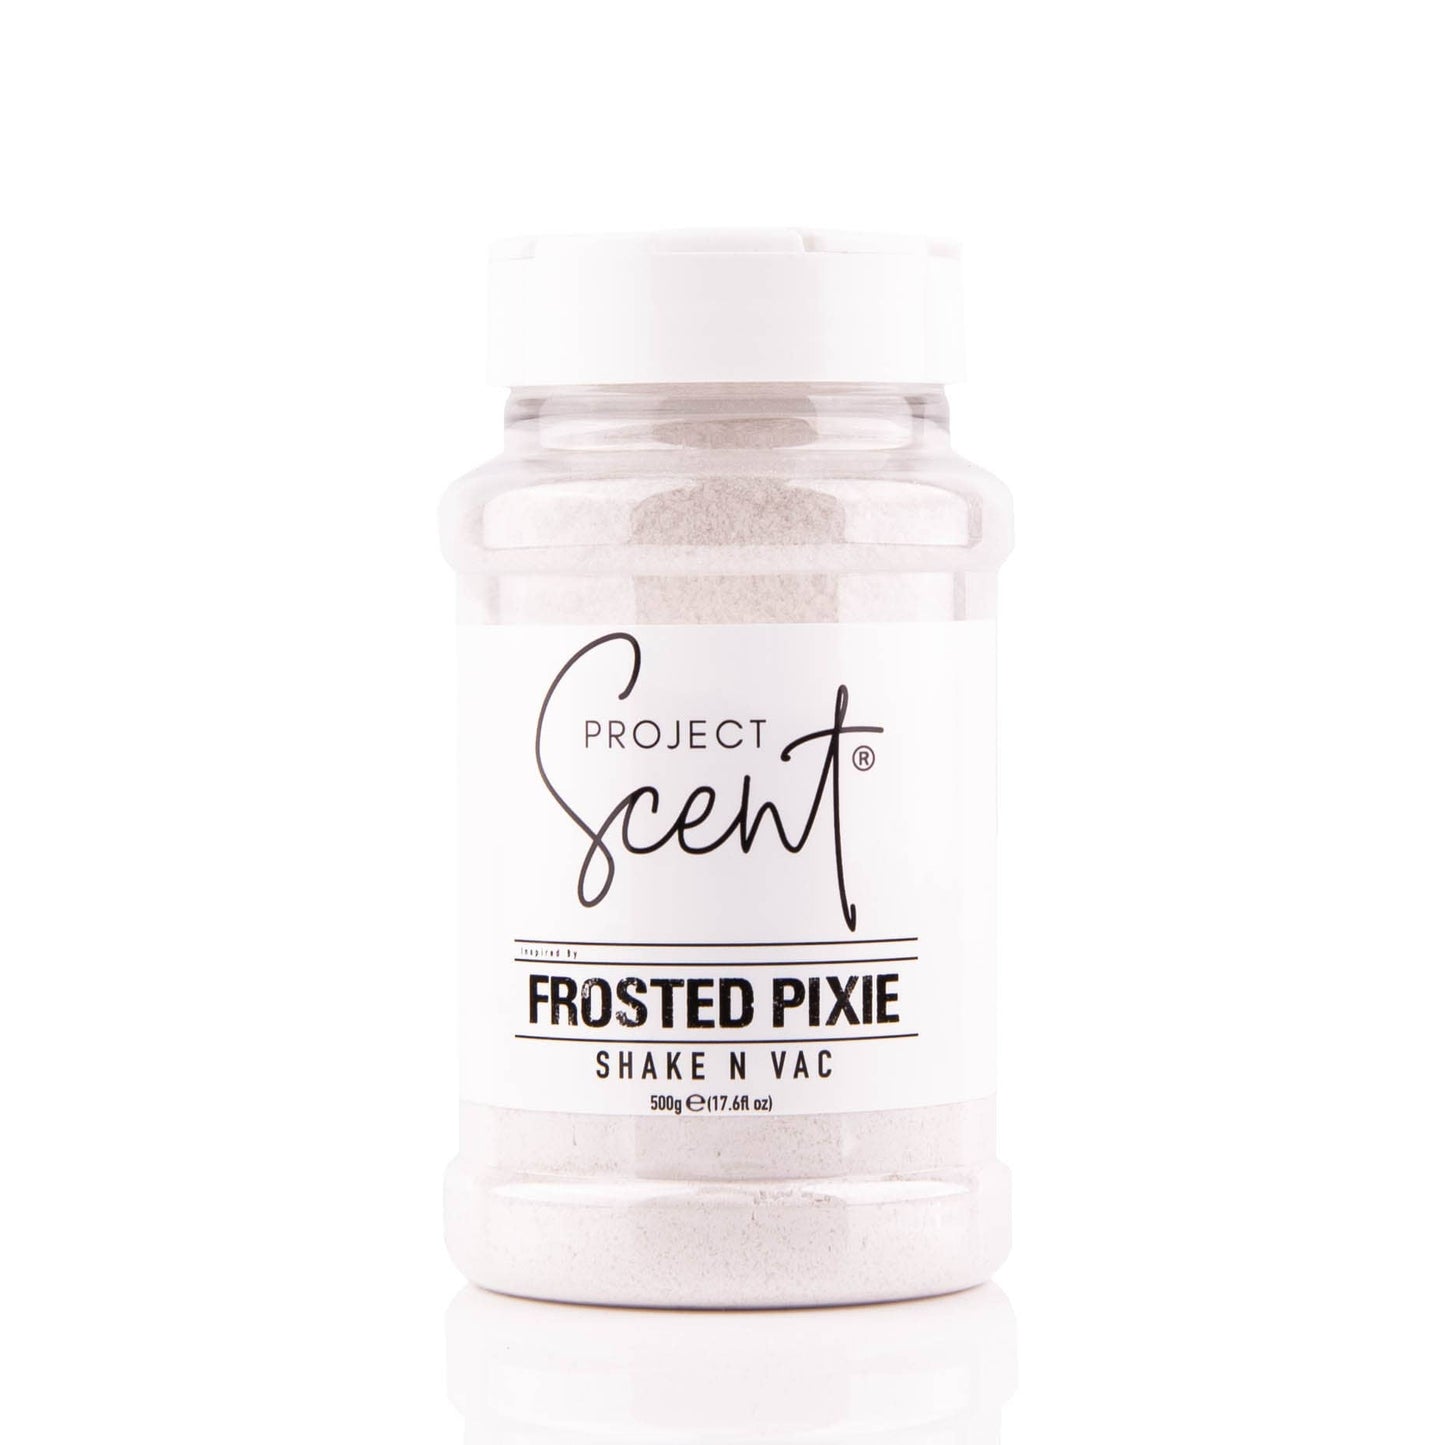 Project Scent Frosted Pixie (Snow) Carpet Sprinkles Shake N Vac 500g